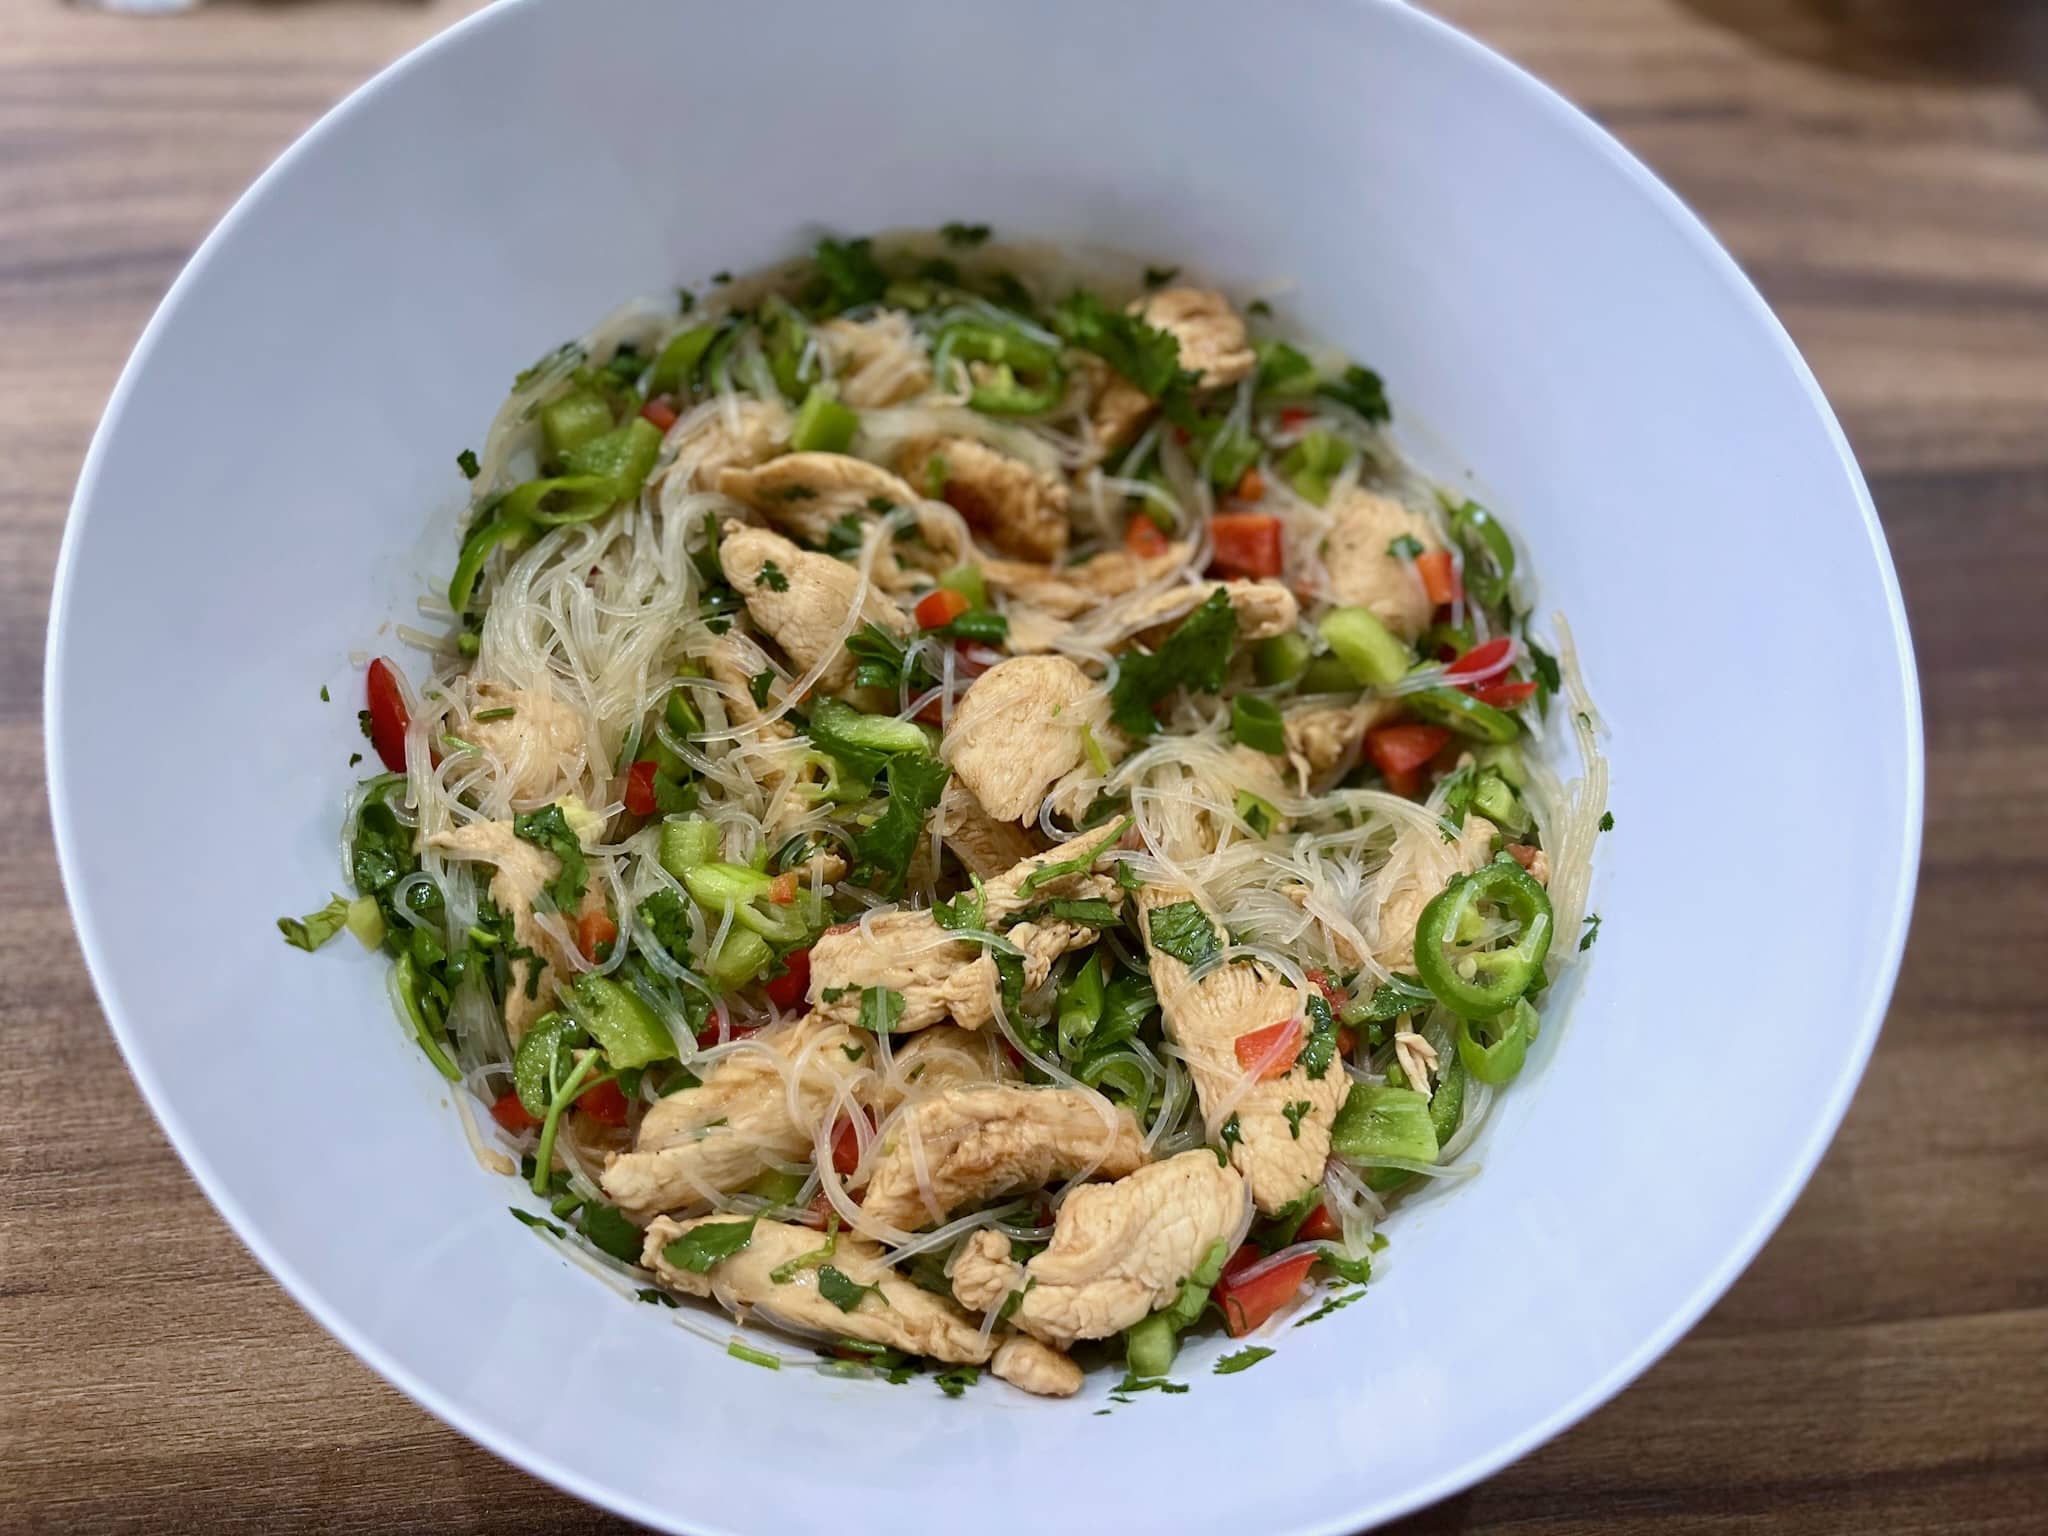 Noodles, chicken and vegetables mixed altogether